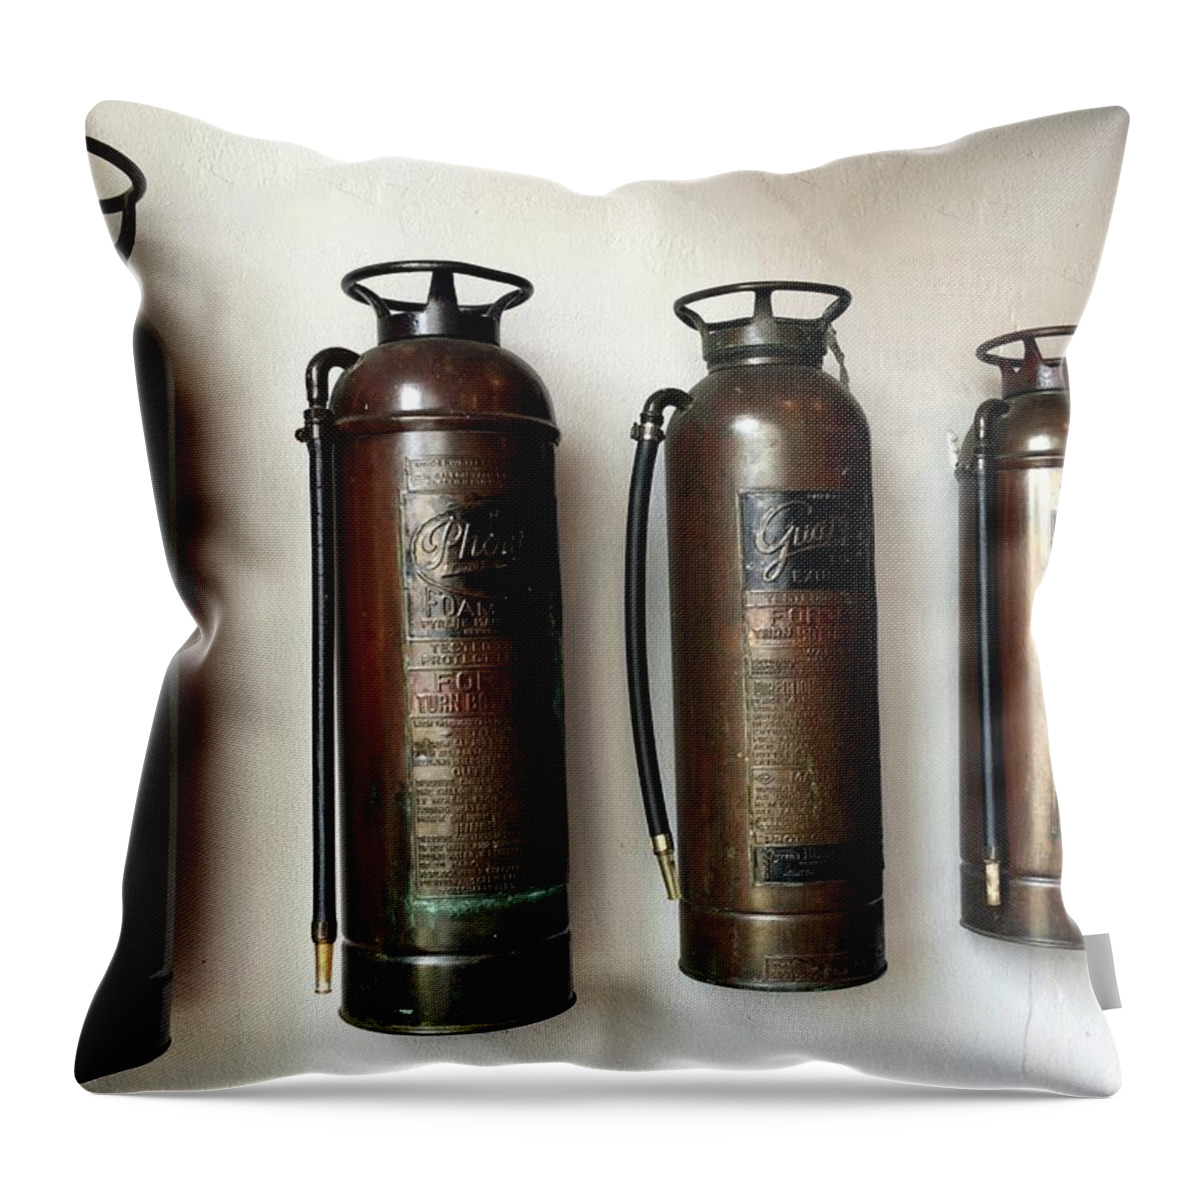 Fire Extinguishers Throw Pillow featuring the photograph To Put Out A Fire by Barbie Corbett-Newmin